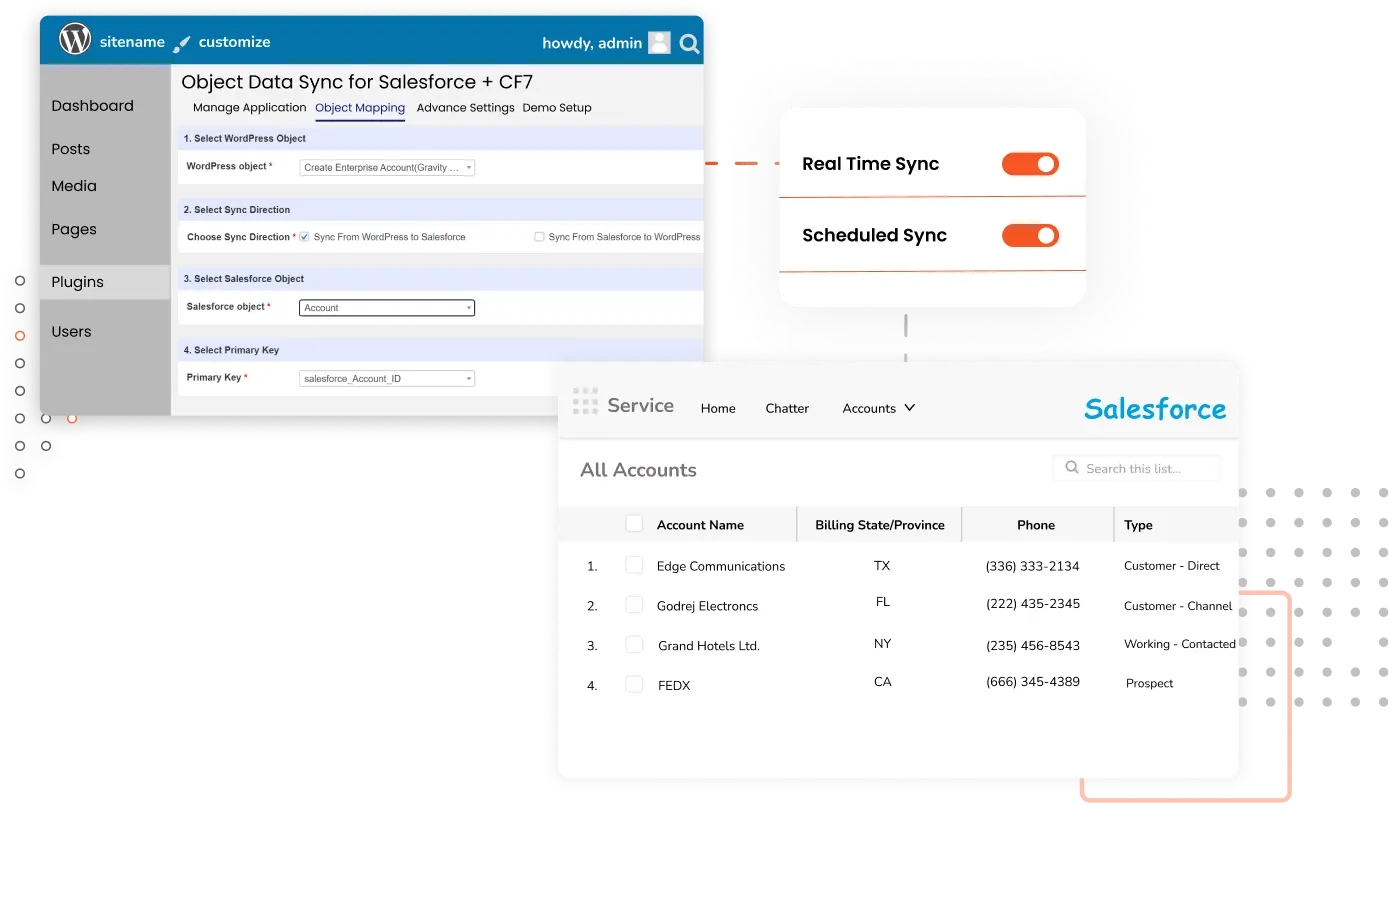 Contact Form 7 (CF7) Integration - Salesforce web to lead Form Integration | Web to Lead Salesforce Integration